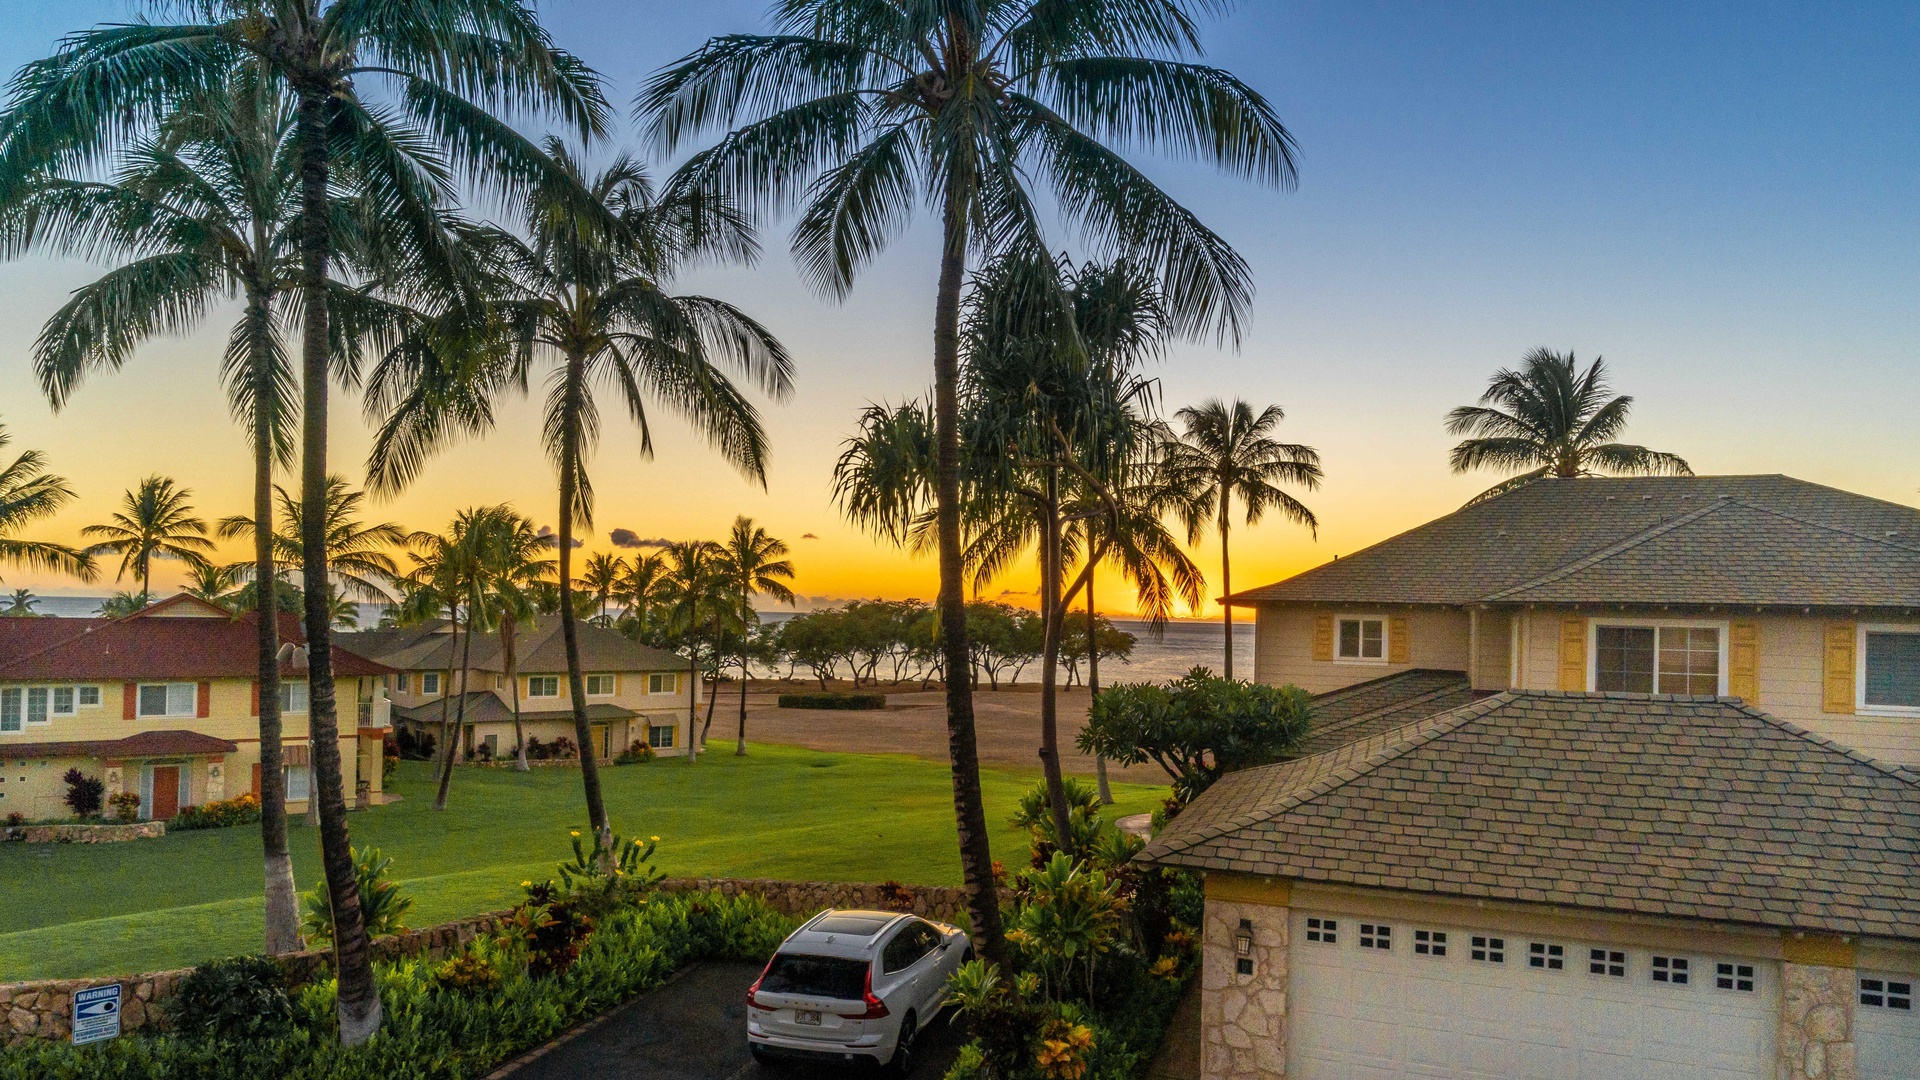 Kapolei Vacation Rentals, Kai Lani 16C - An aerial view over the condo of island sunsets and swaying palm trees.